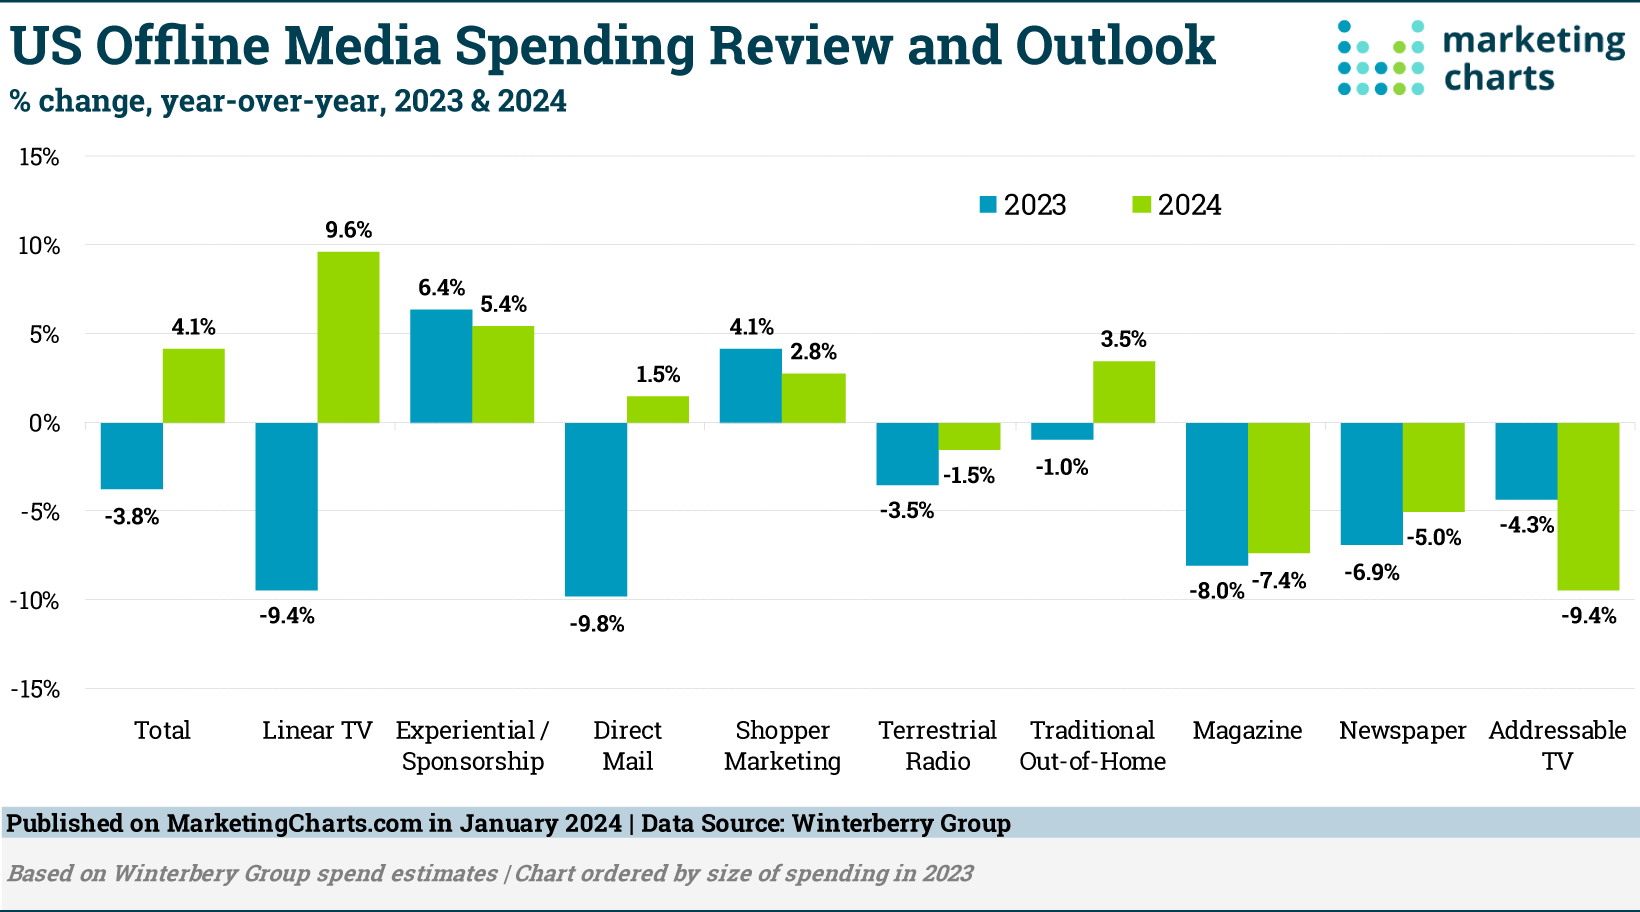 US Offline Media Spend in 2023 and the Outlook for 2024